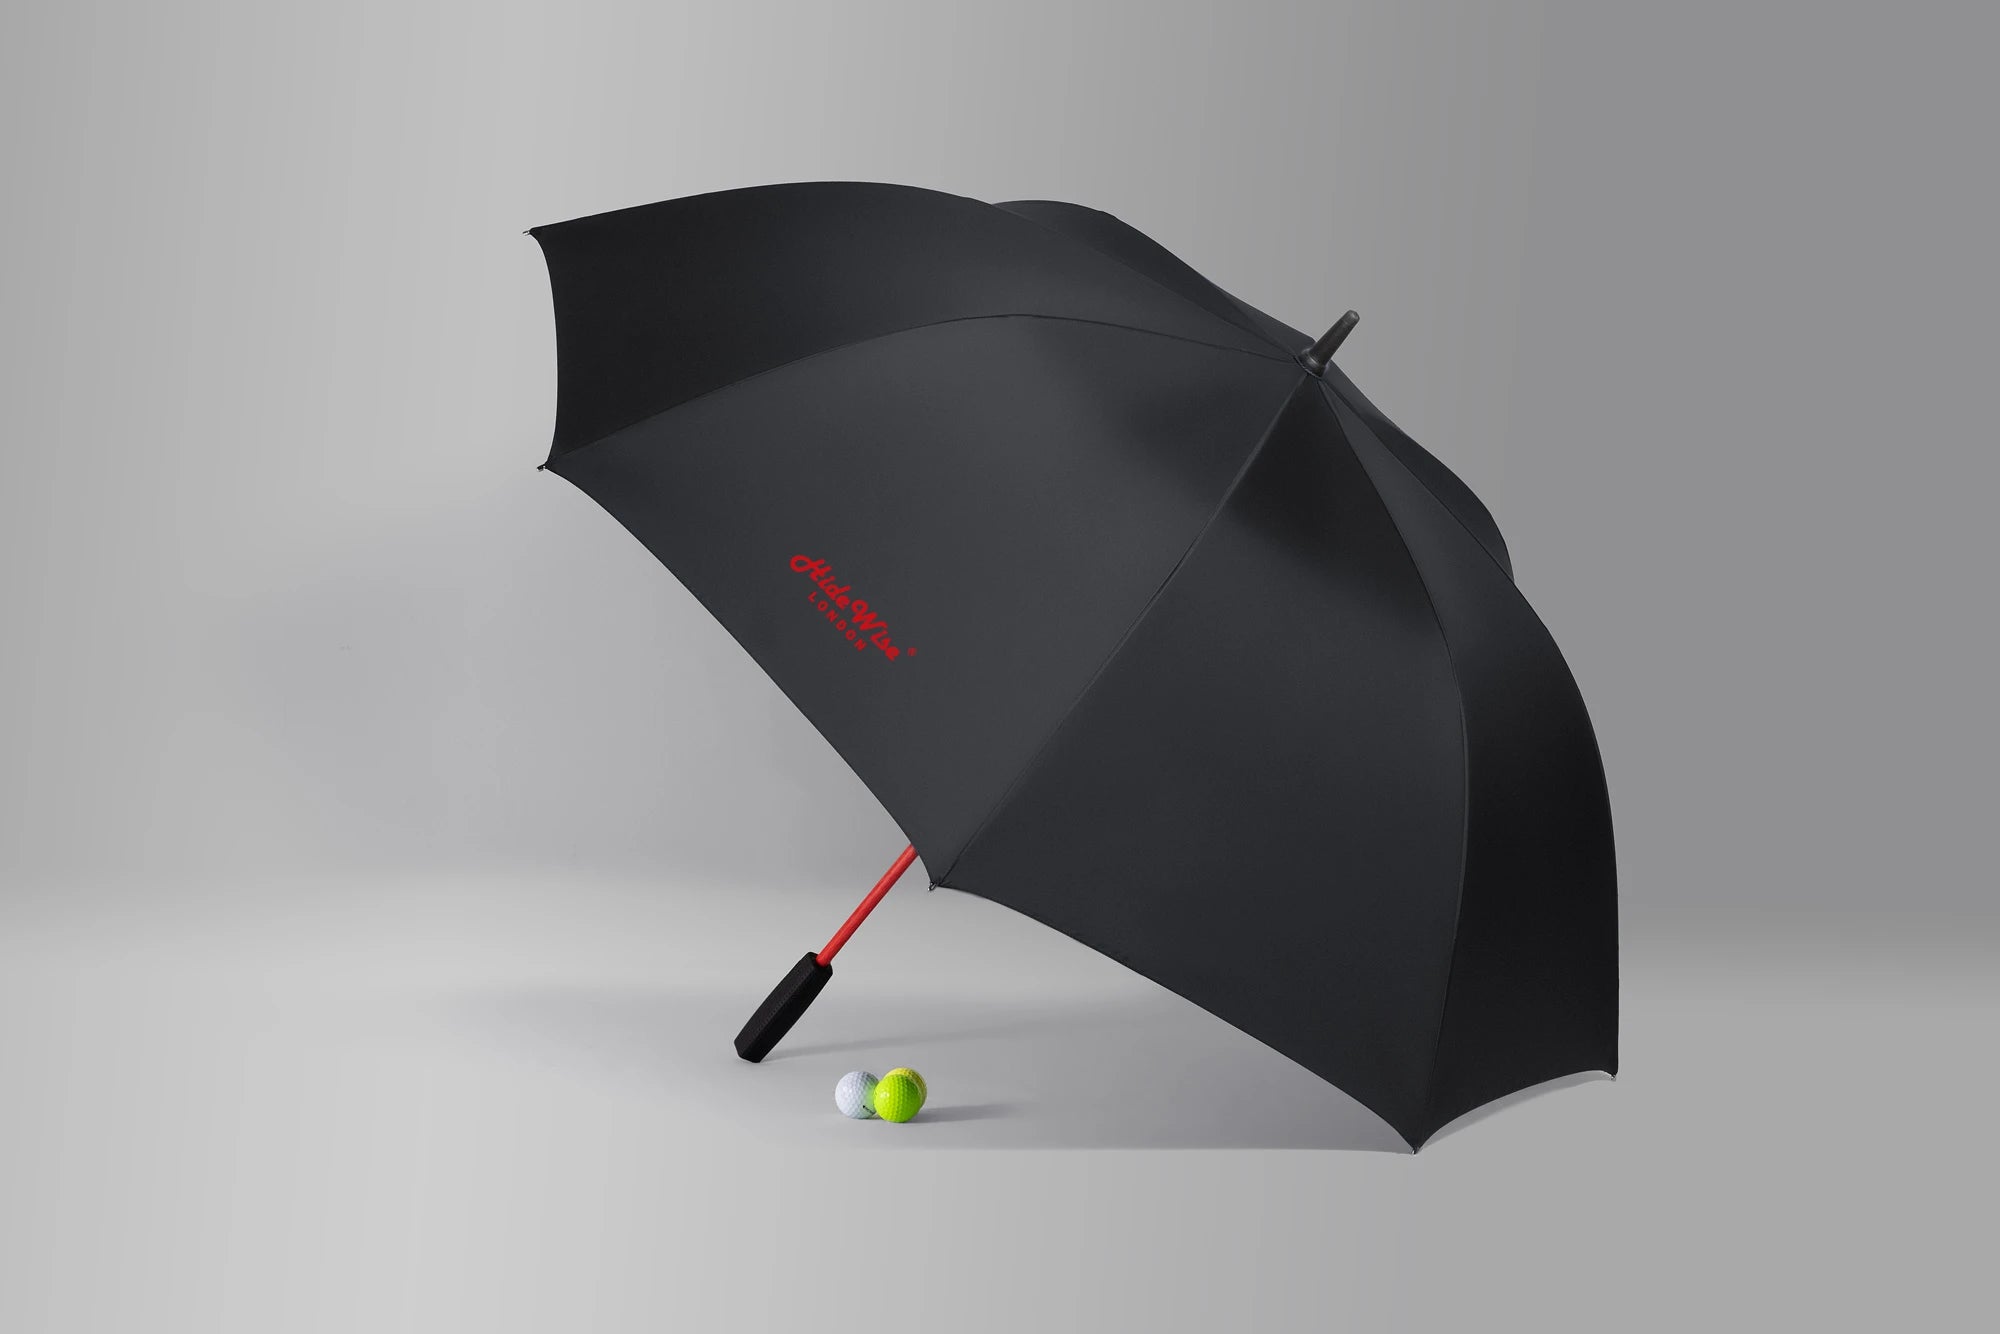 Hidewise-london-premium-quality-luxury-brand-golf-umbrella-gift-strong-sturdy-wind-proof-gust-proof-black-red-brolly